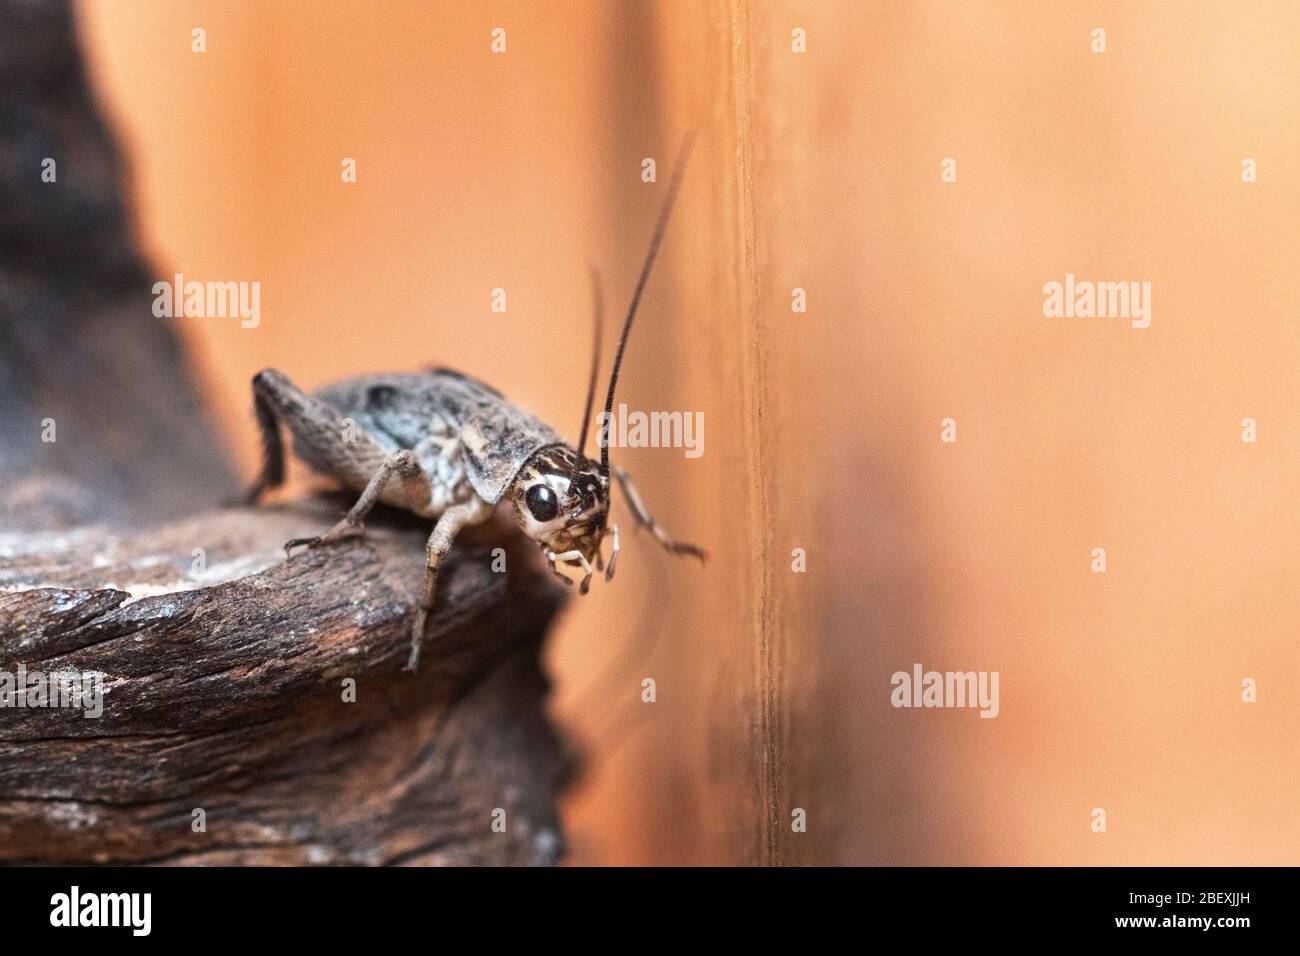 close up of a house cricket in a vivarium in the UK Stock Photo